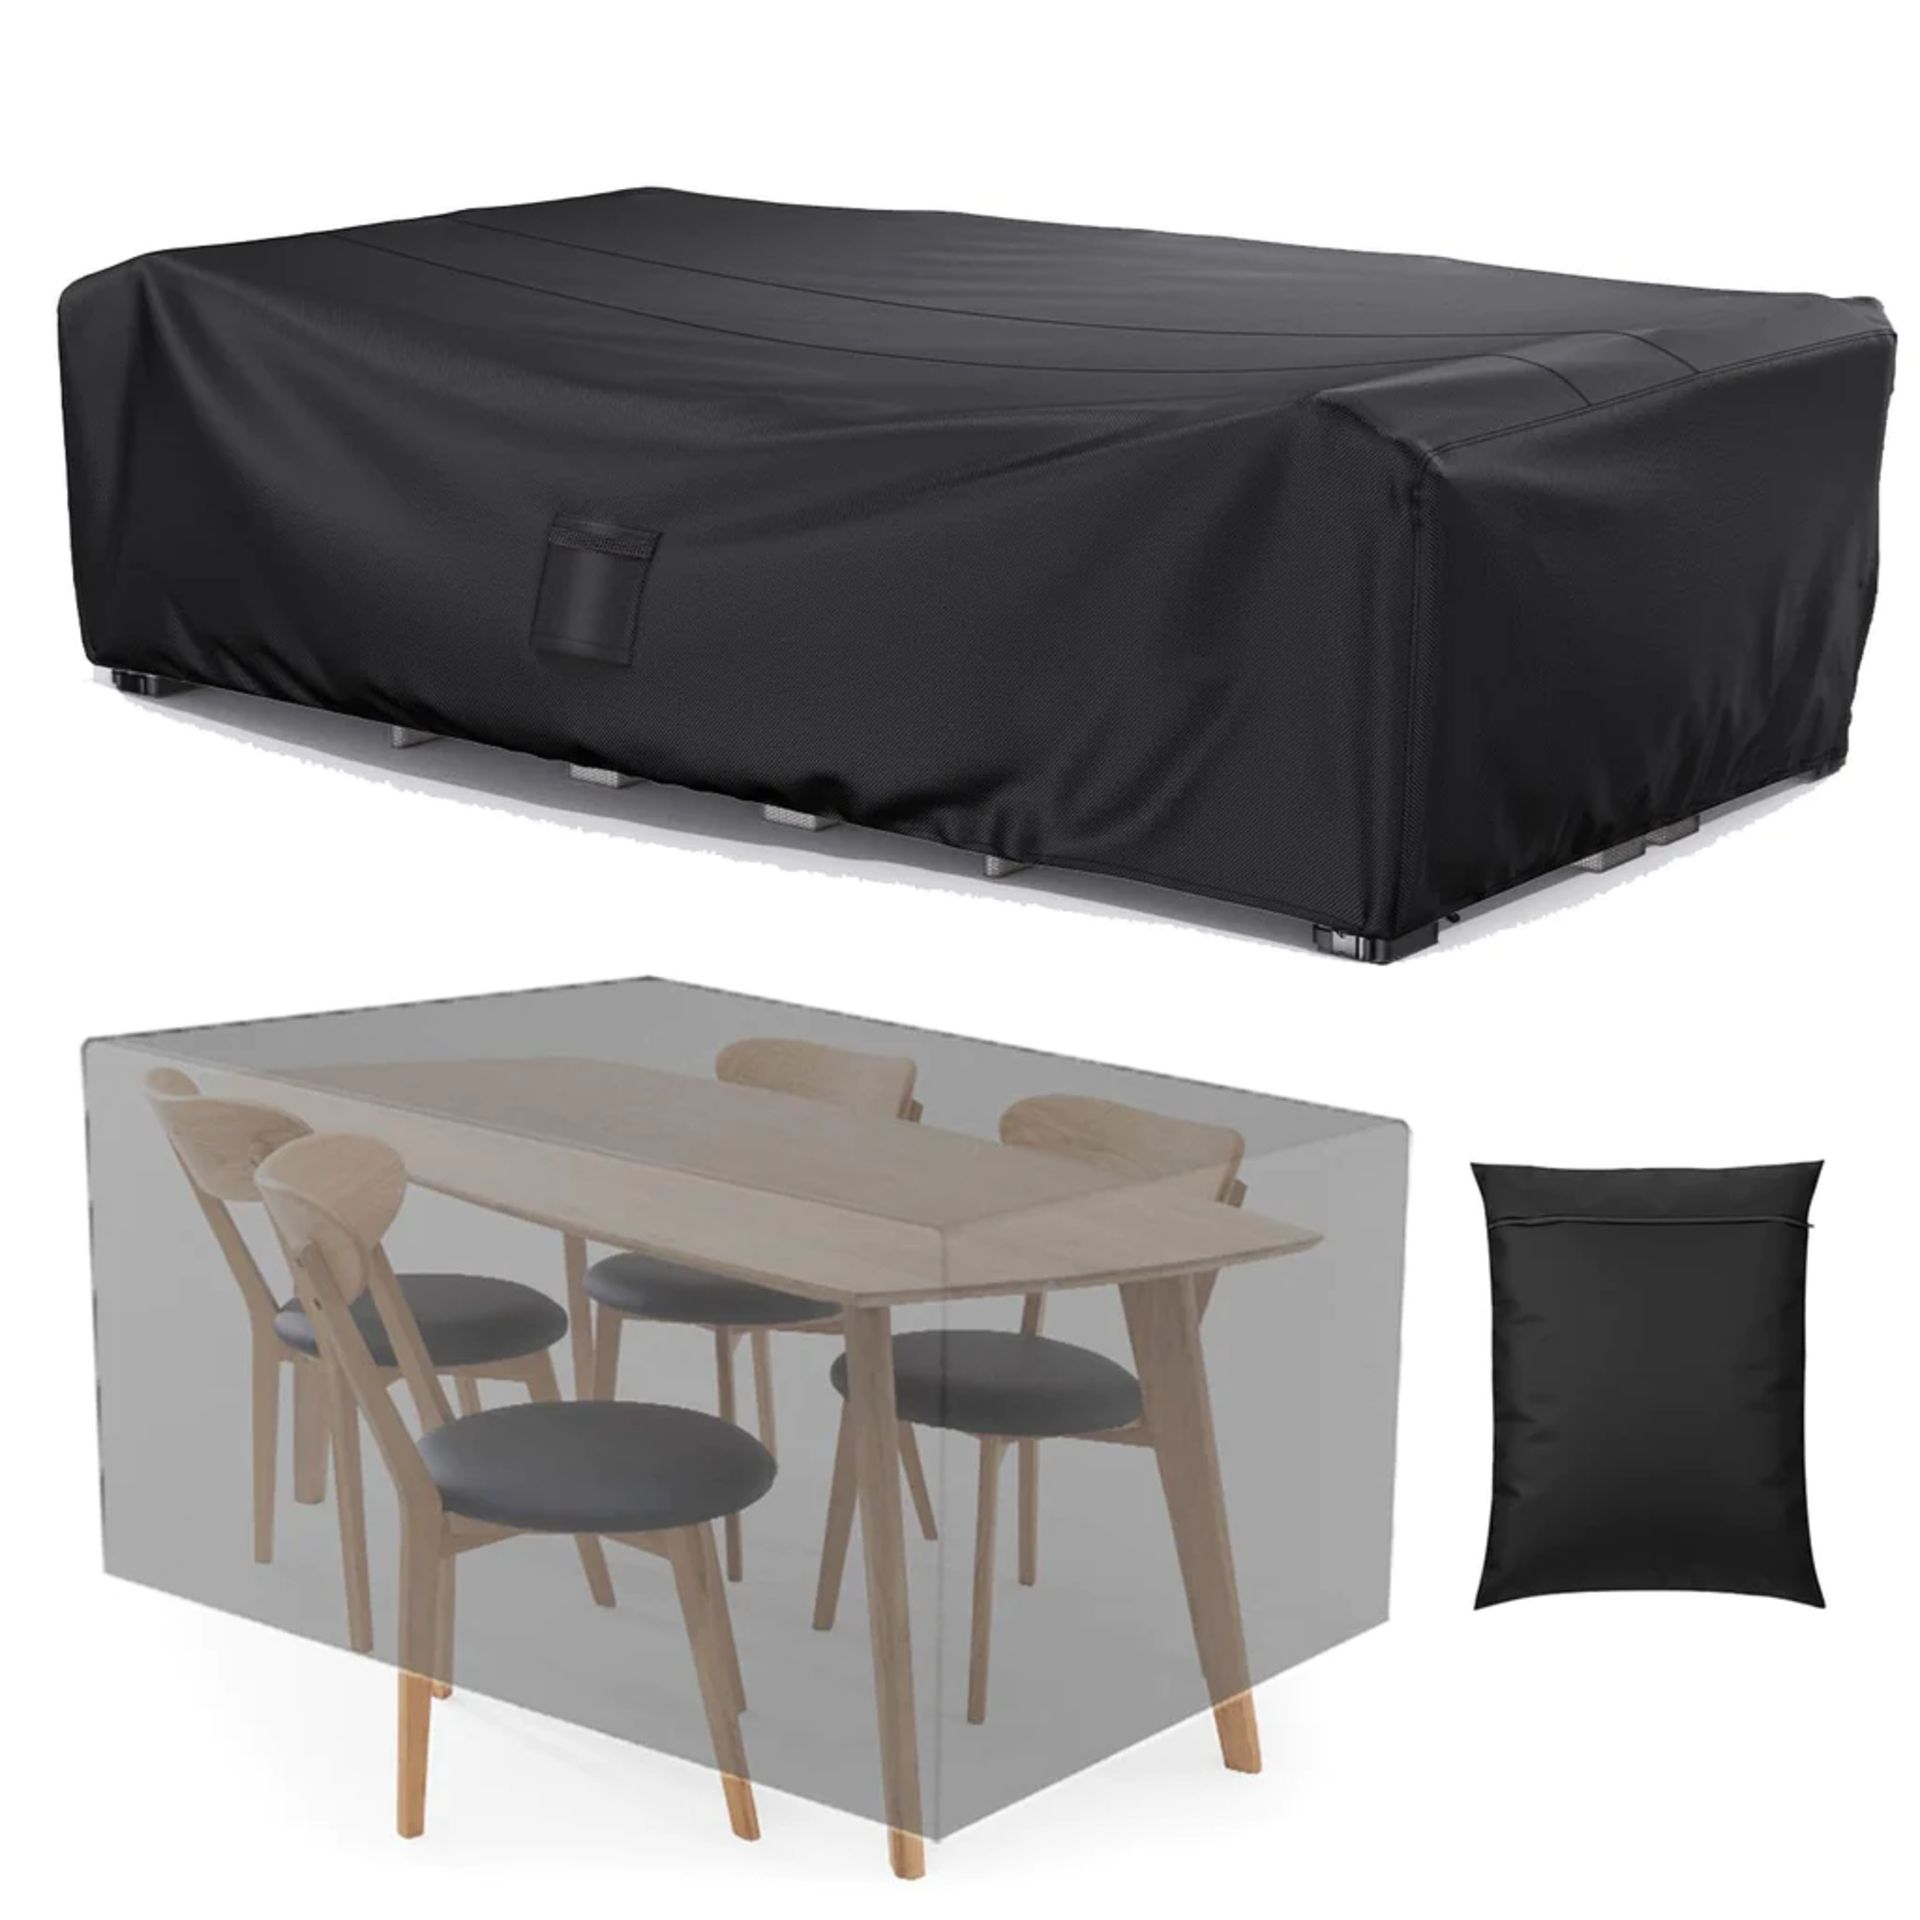 Brand New Garden Furniture Covers Waterproof 170X94X71Cm, Trunk Patio Furniture Covers 600D